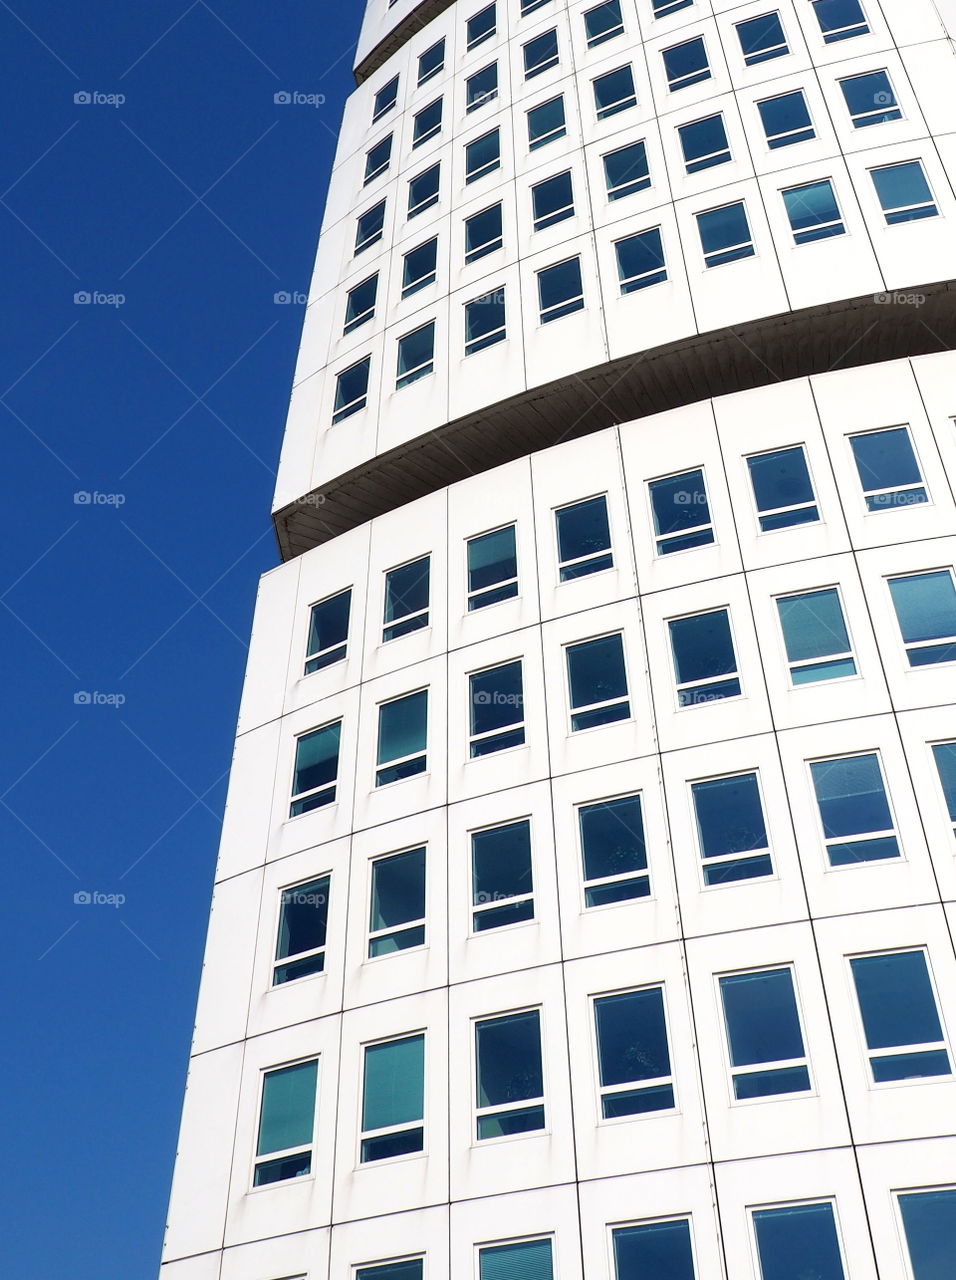 Close-up of the turning torso building in Malmö, Sweden on a sunny day with bright blue sky.